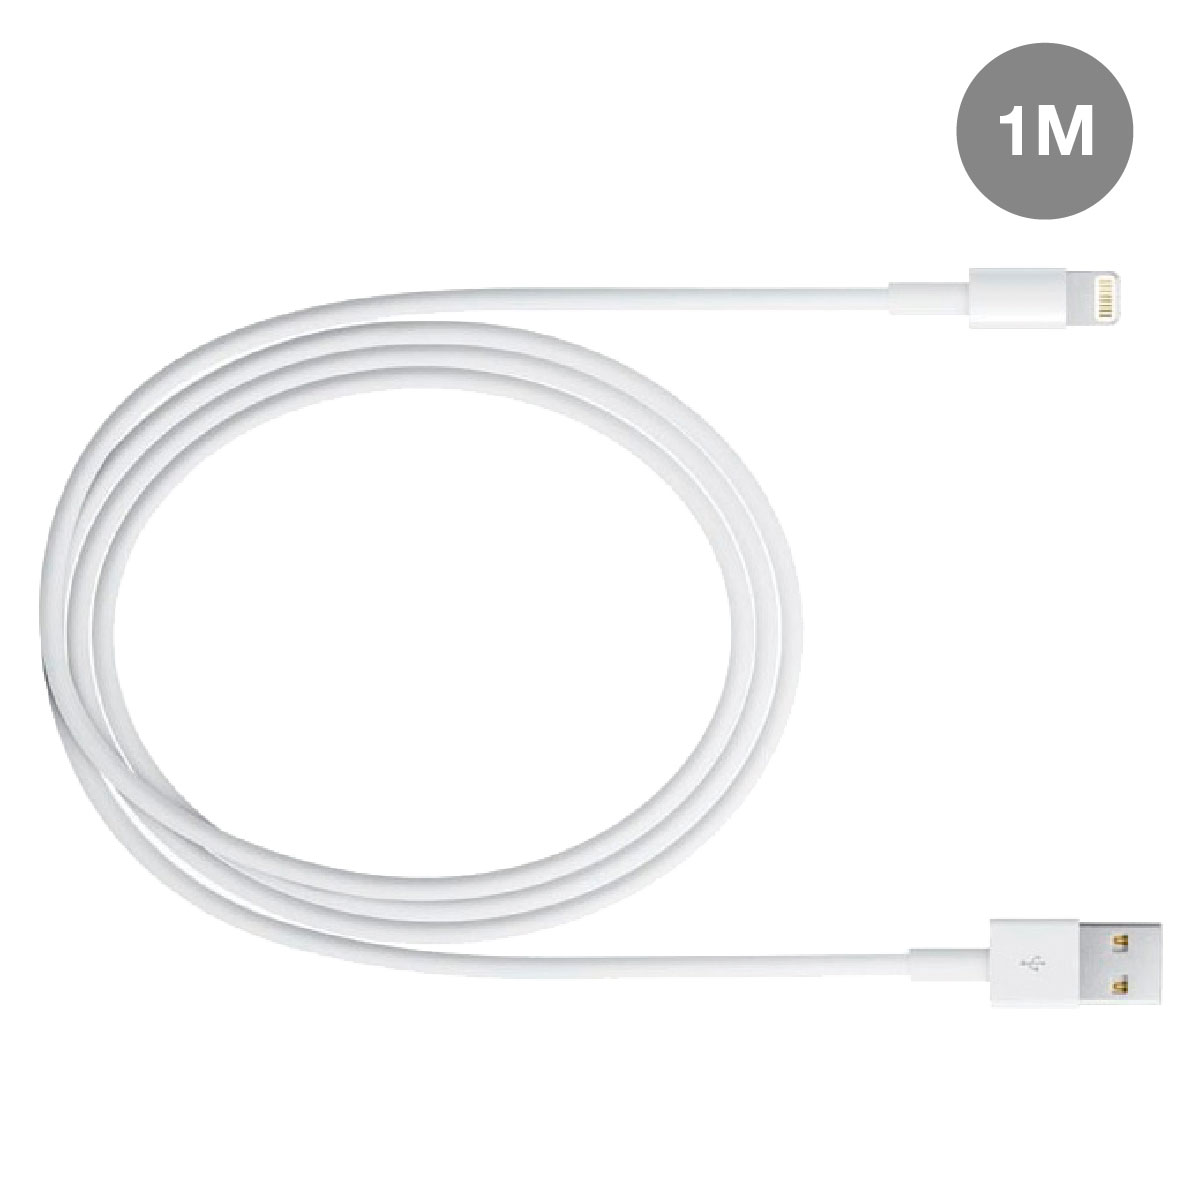 Cable USB para iPhone 1M